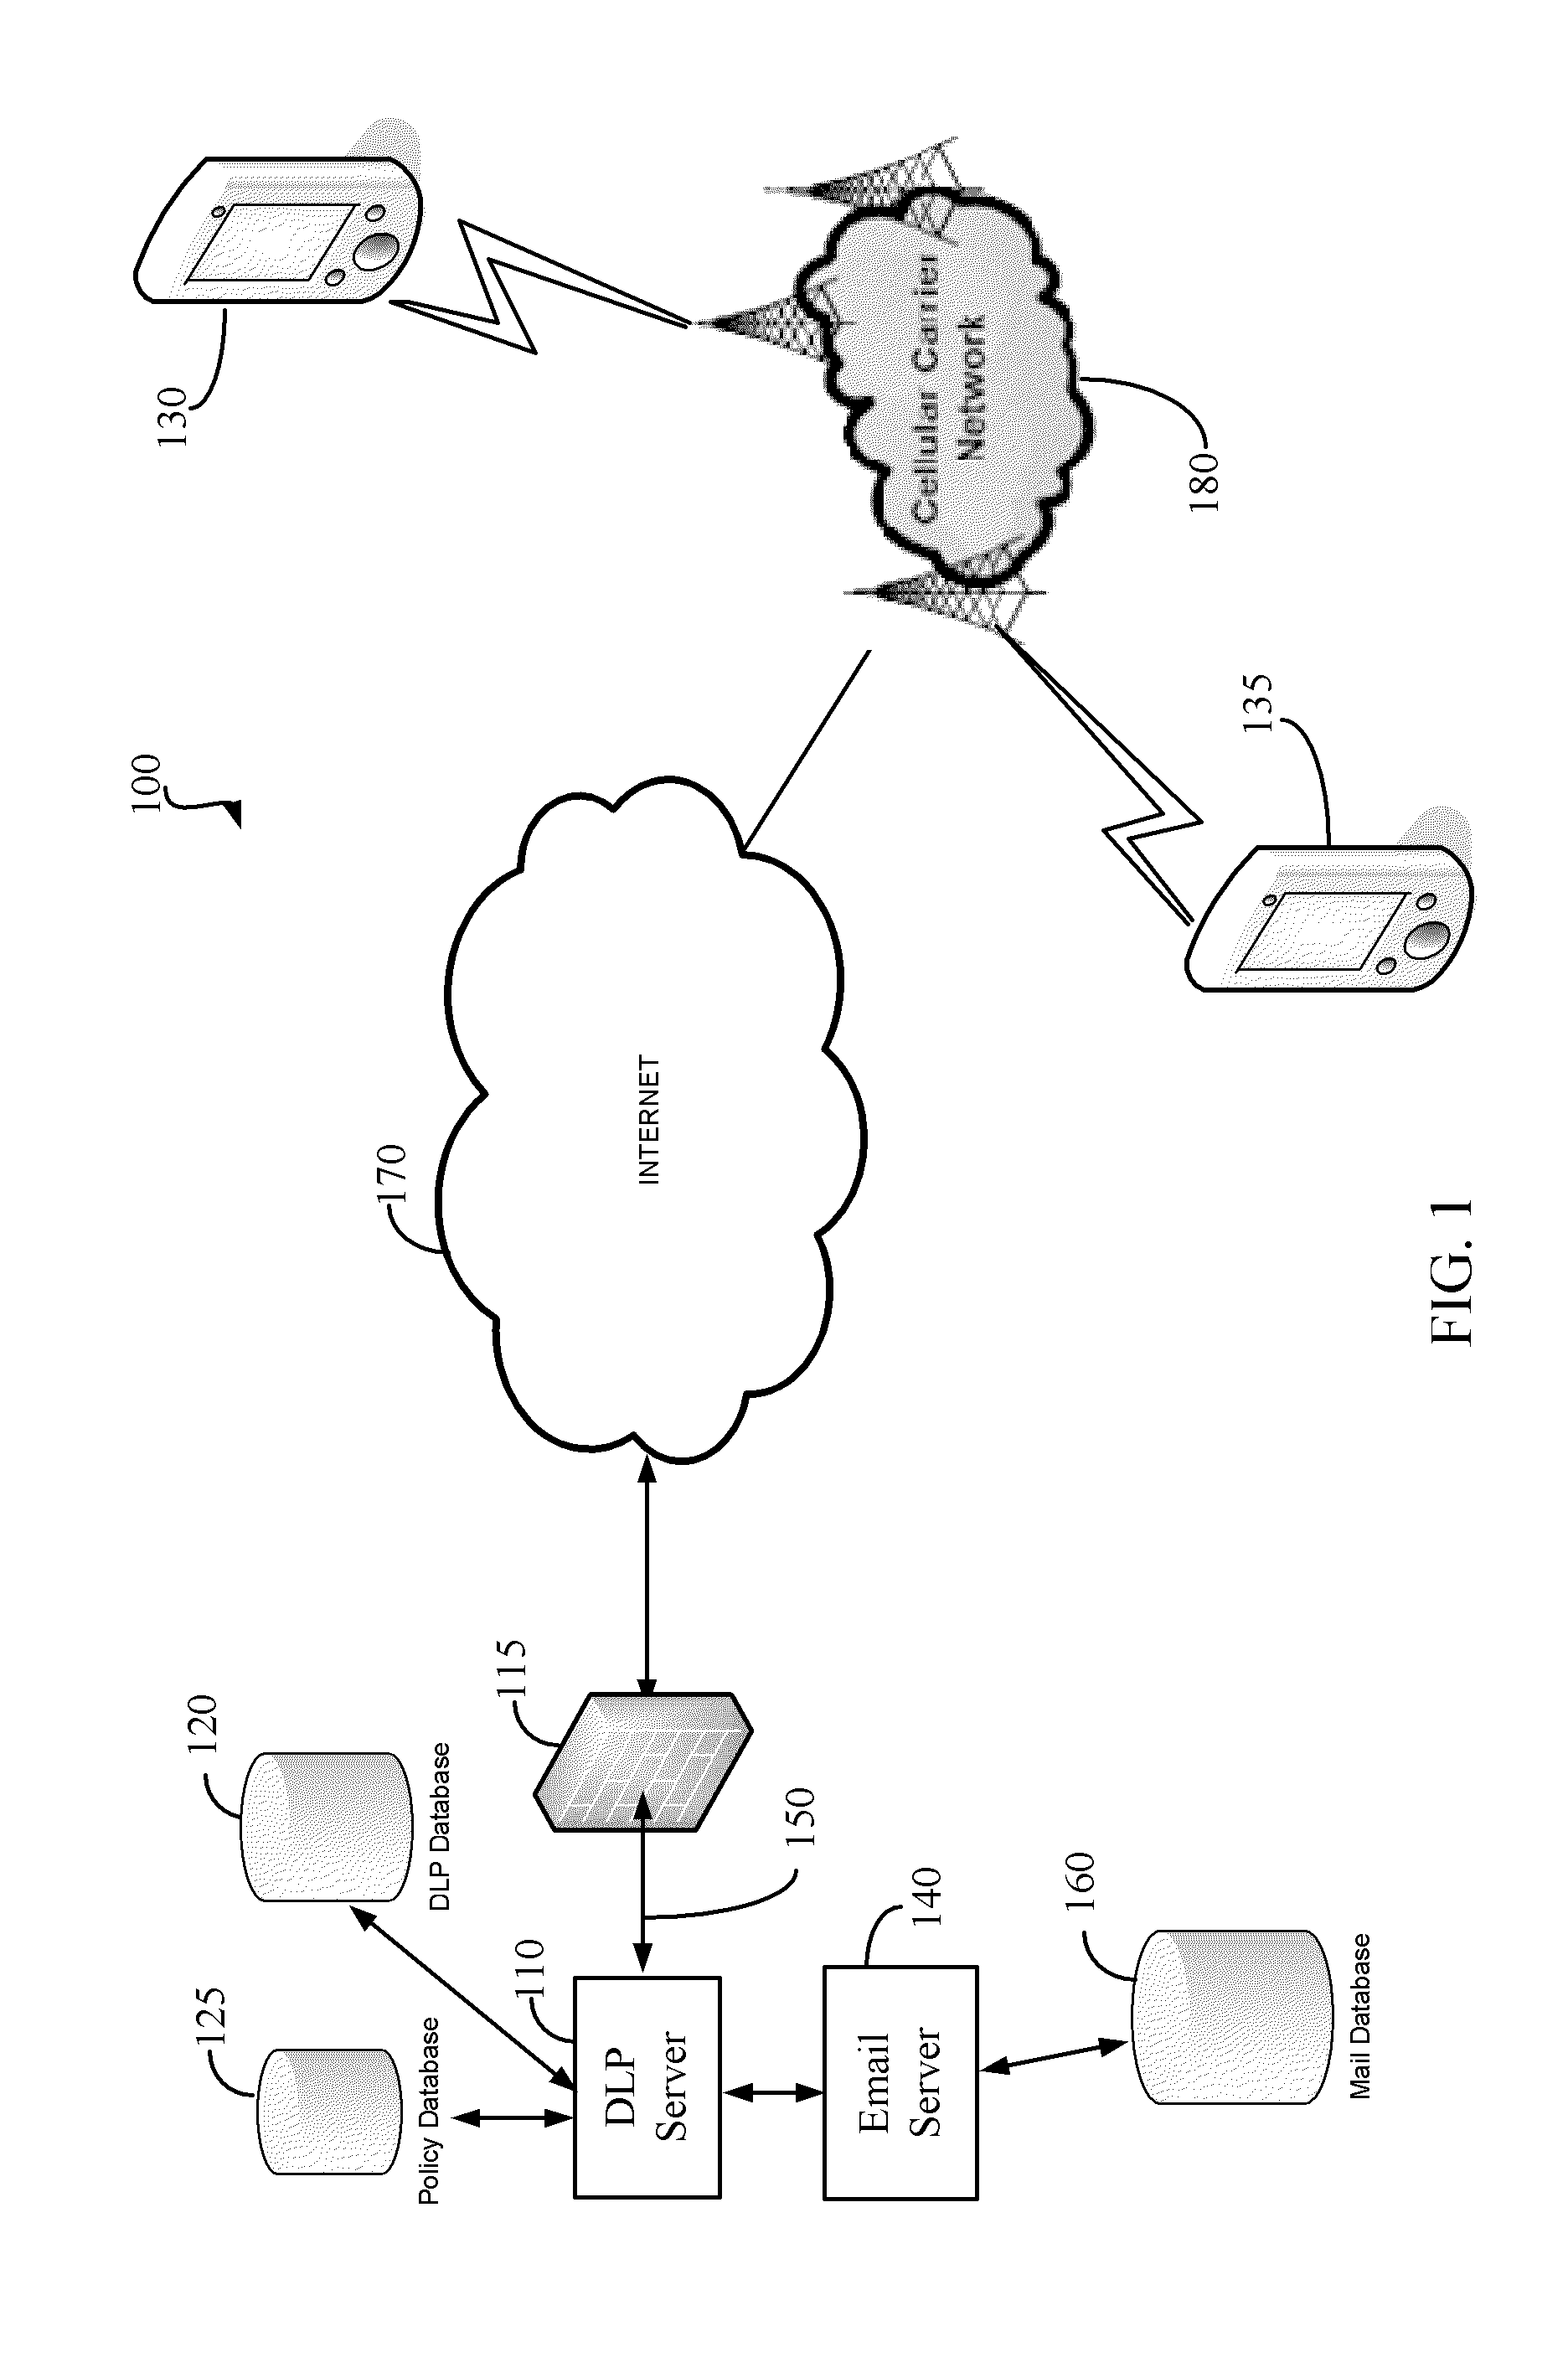 Method and apparatus for managing the transfer of sensitive information to mobile devices